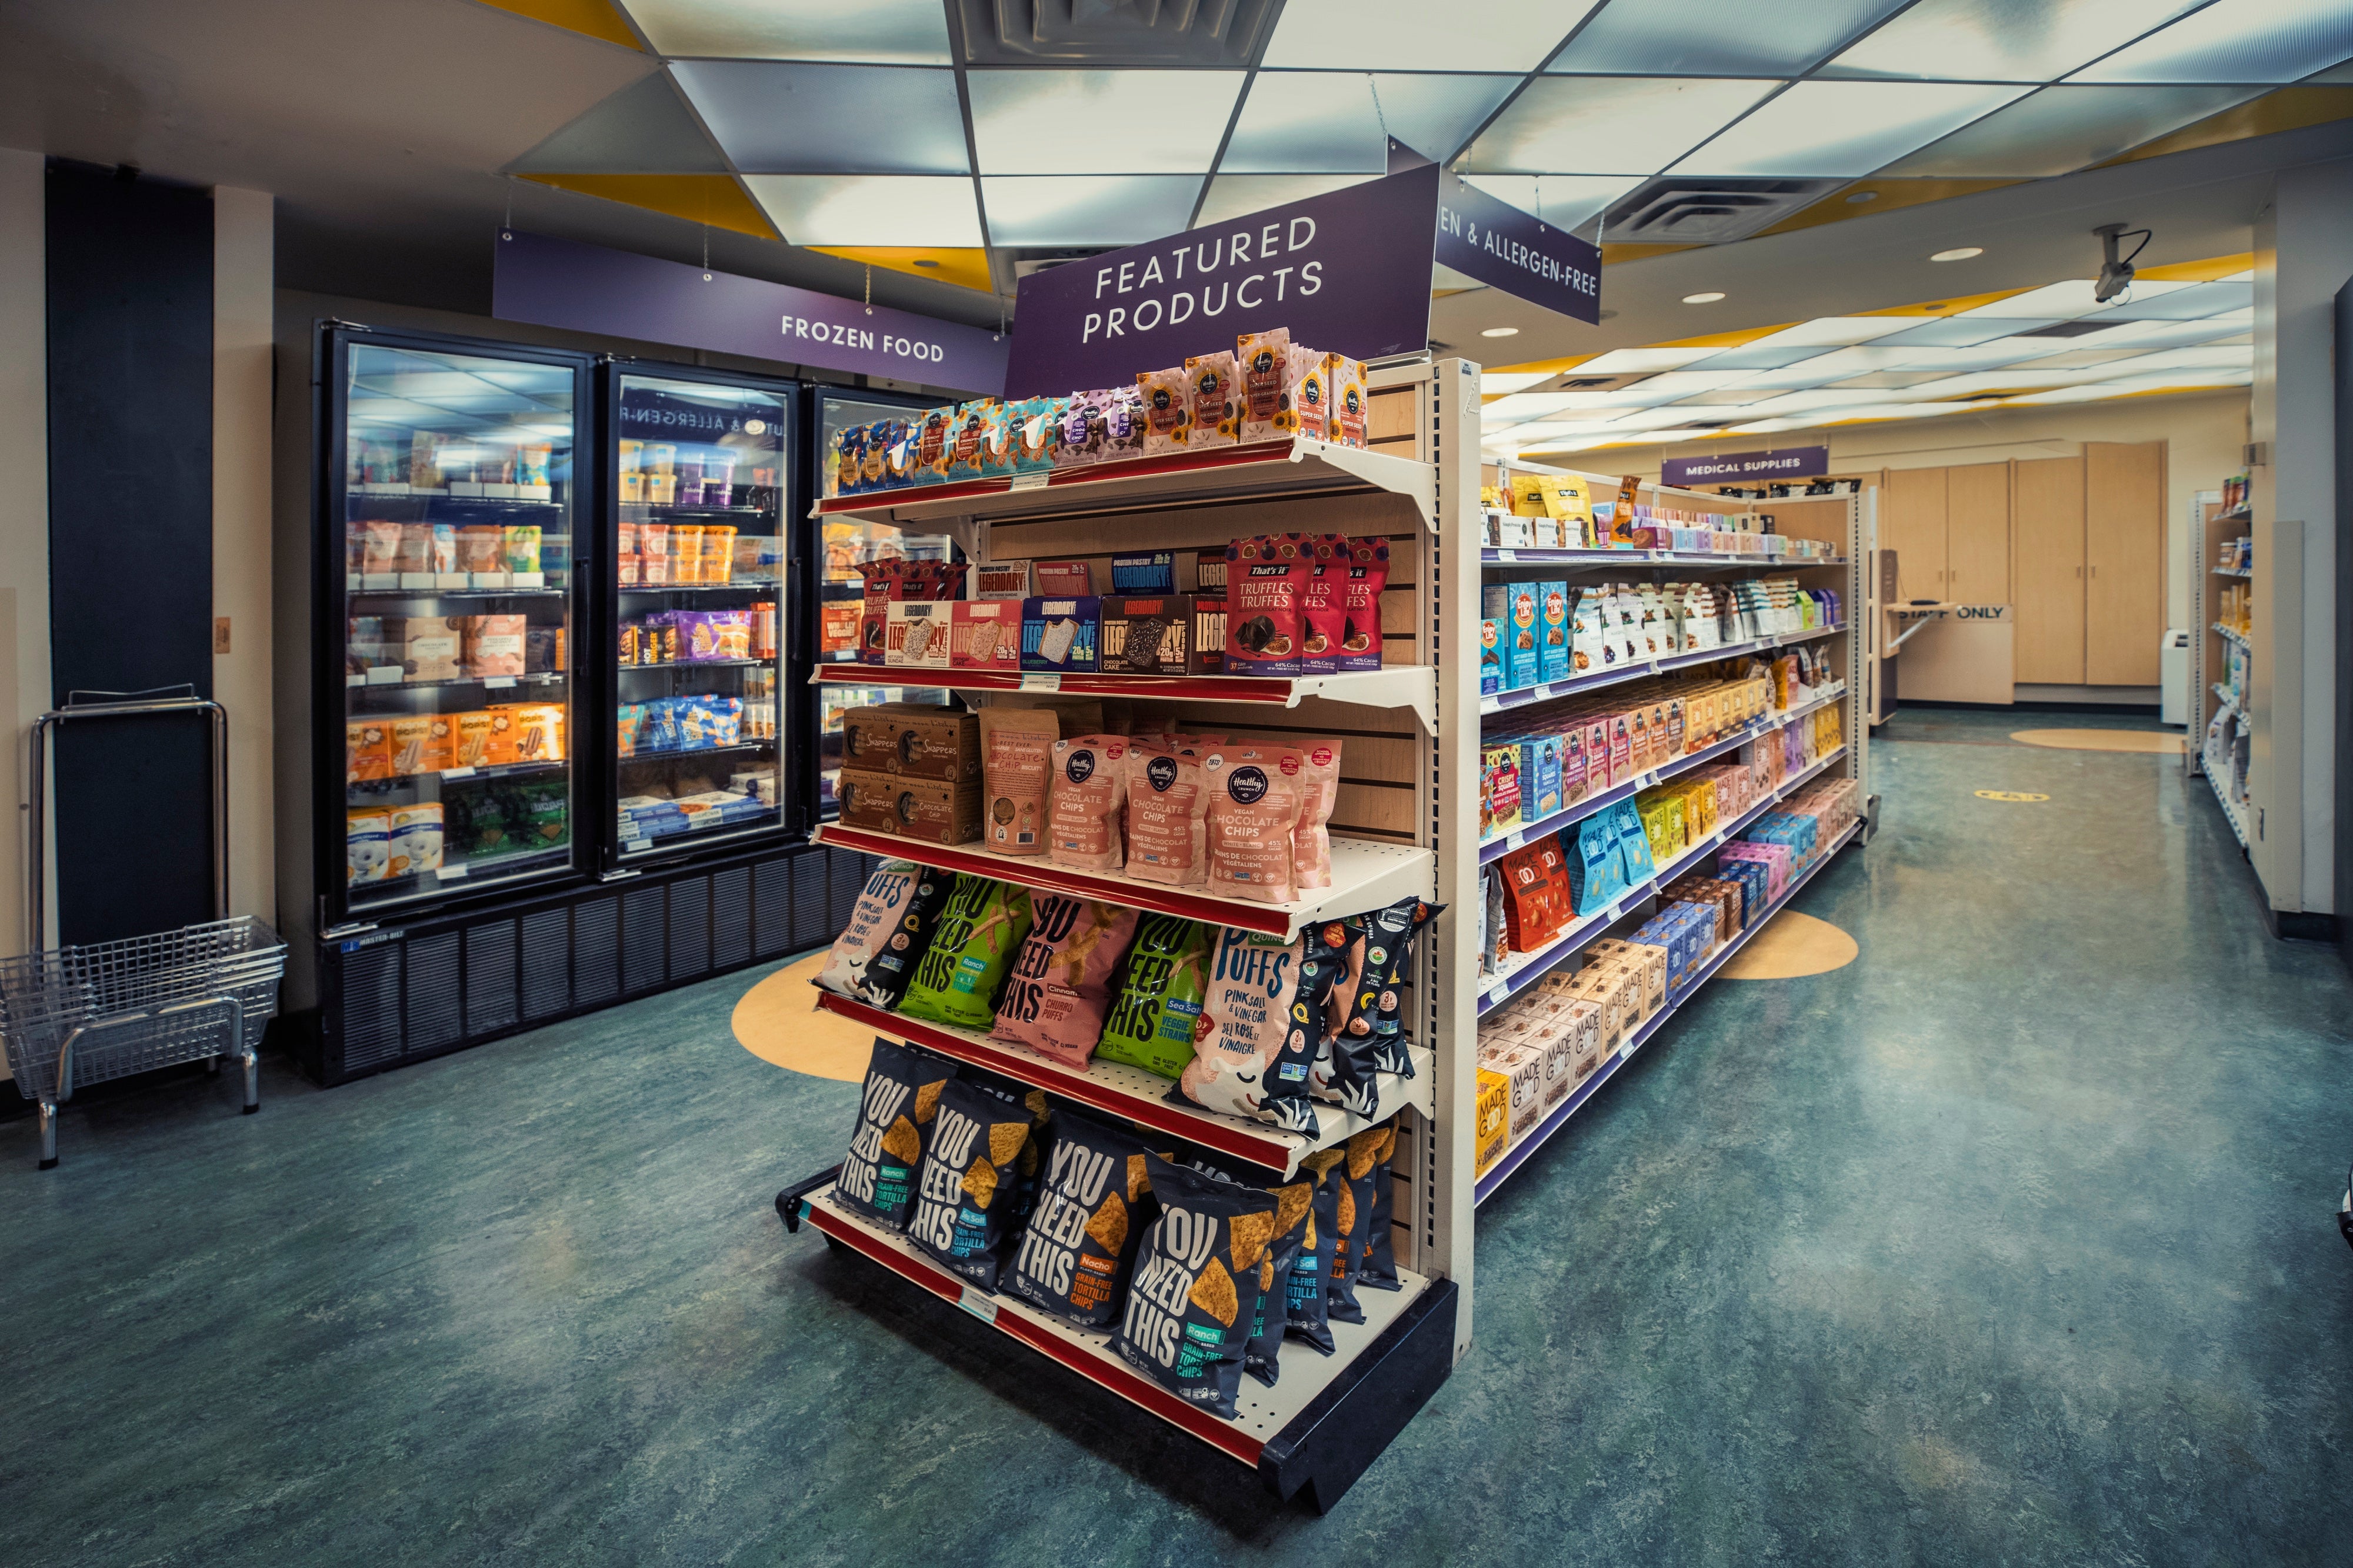 Shelves stocked with packaged foods inside Specialty Food Shop with a purple sign that reads “Featured products.”